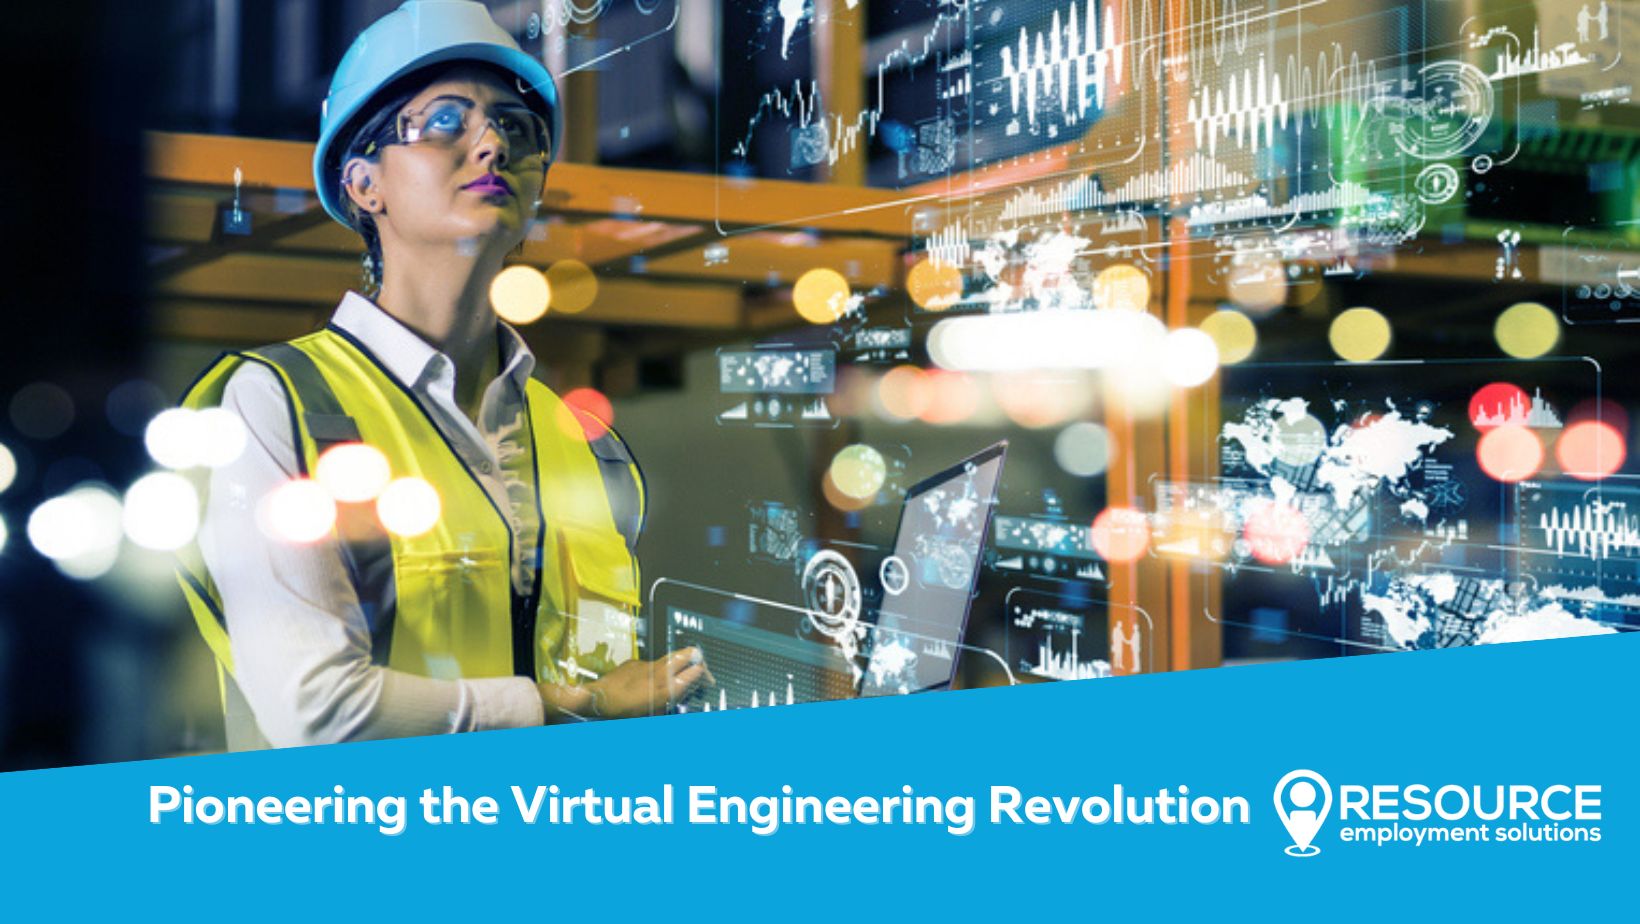 Pioneering the Virtual Engineering Revolution with Resource Employment Solutions